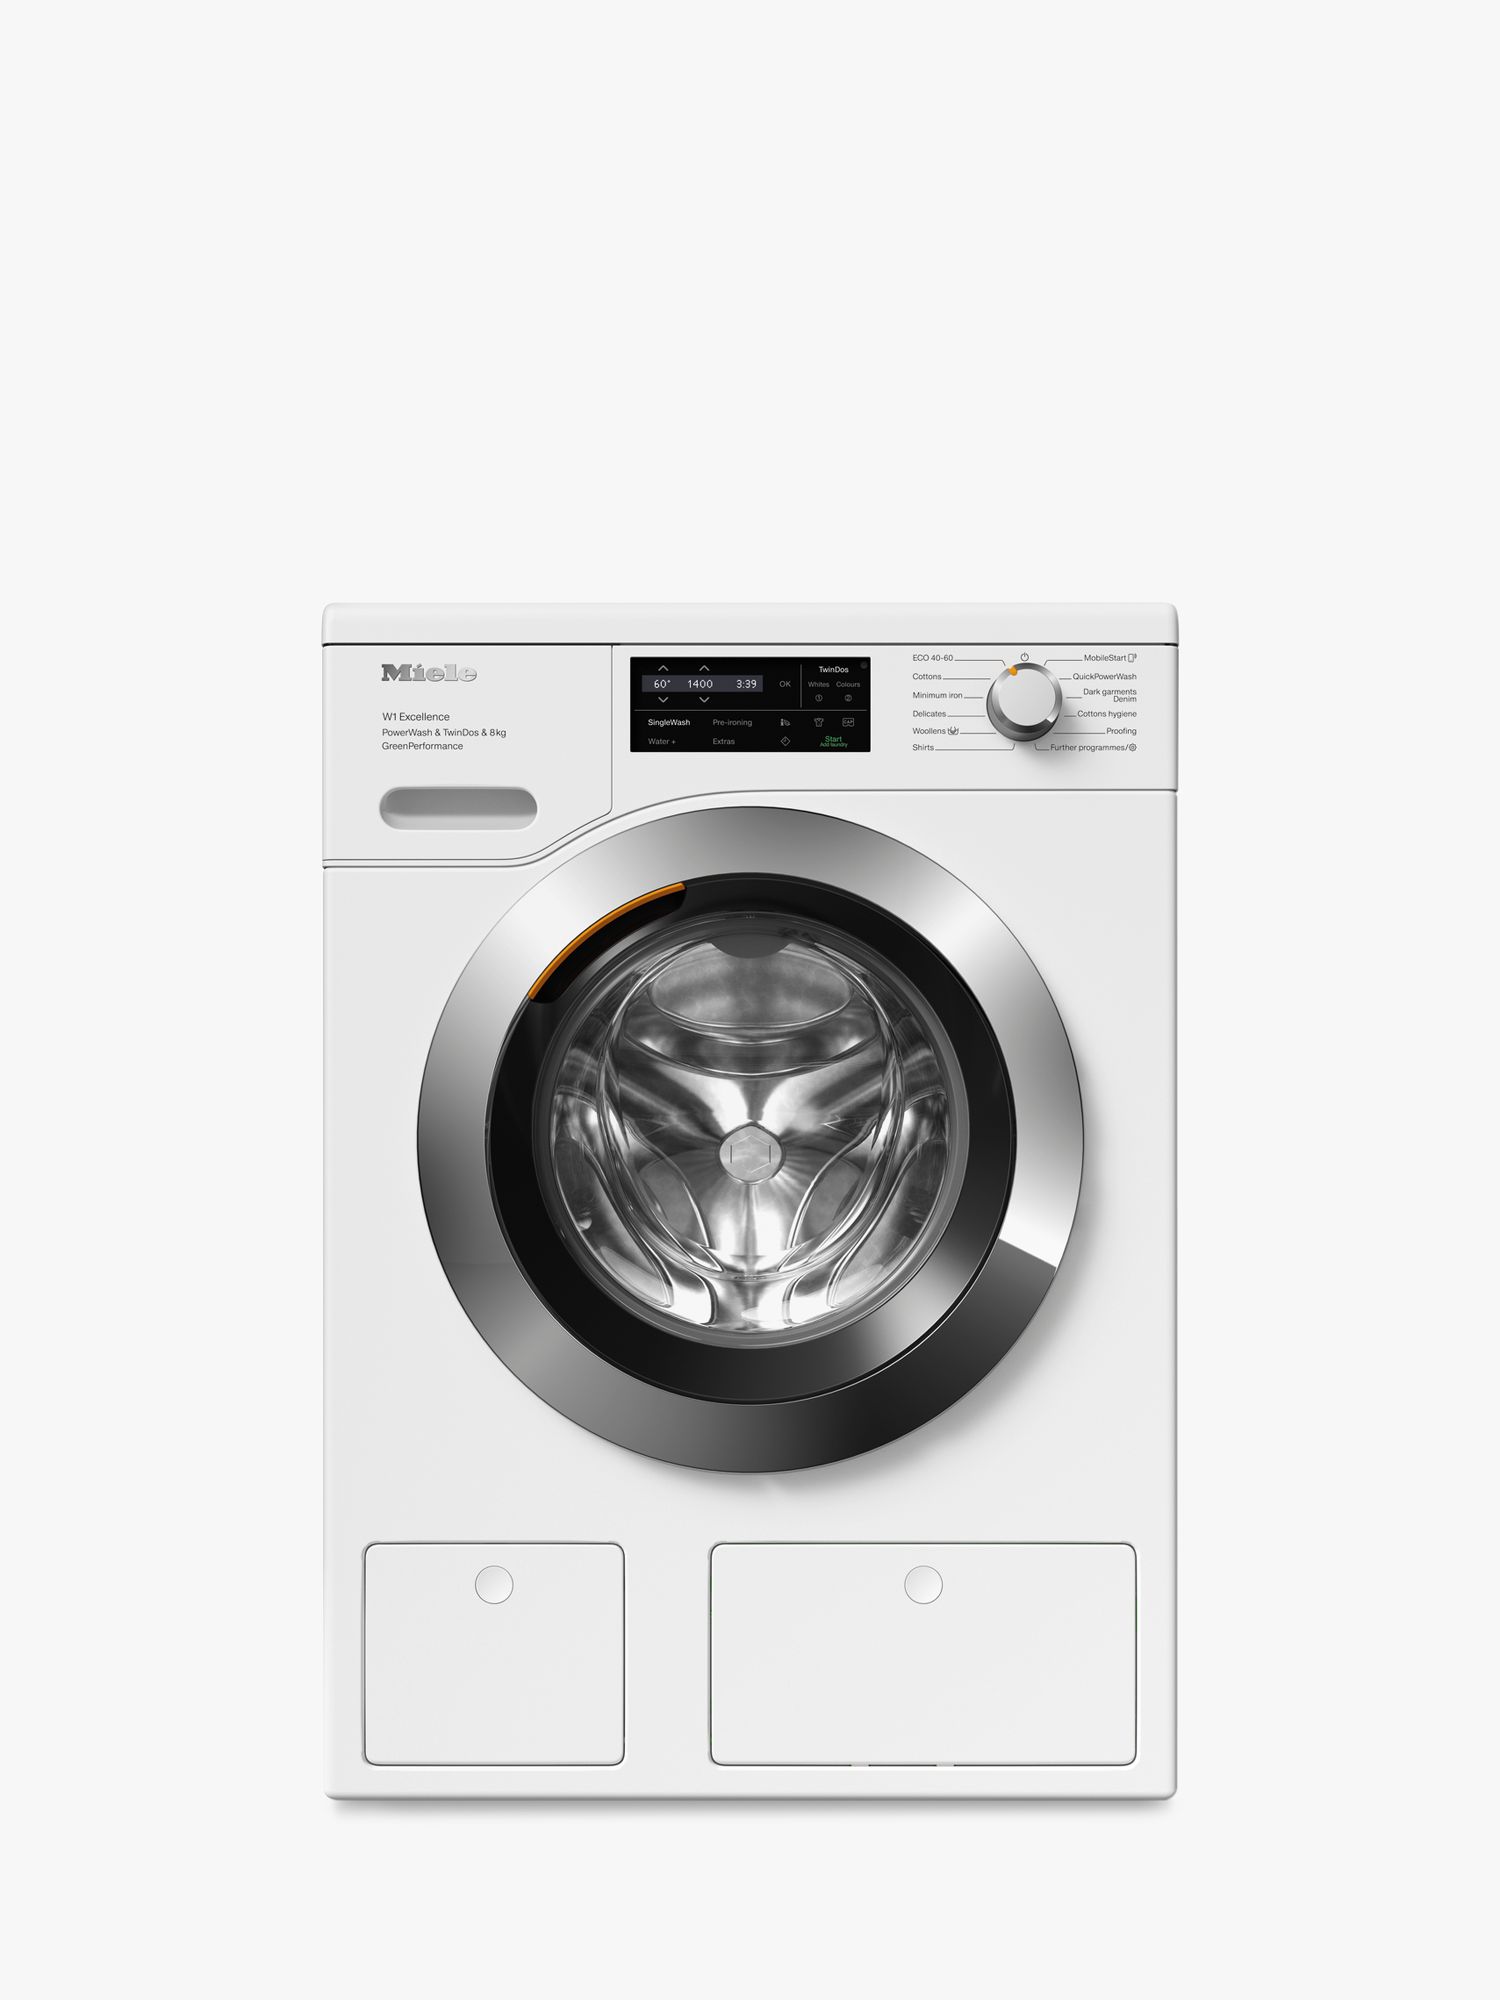 Miele WEH865 Freestanding Washing Machine, 8kg Load, 1400rpm Spin, White